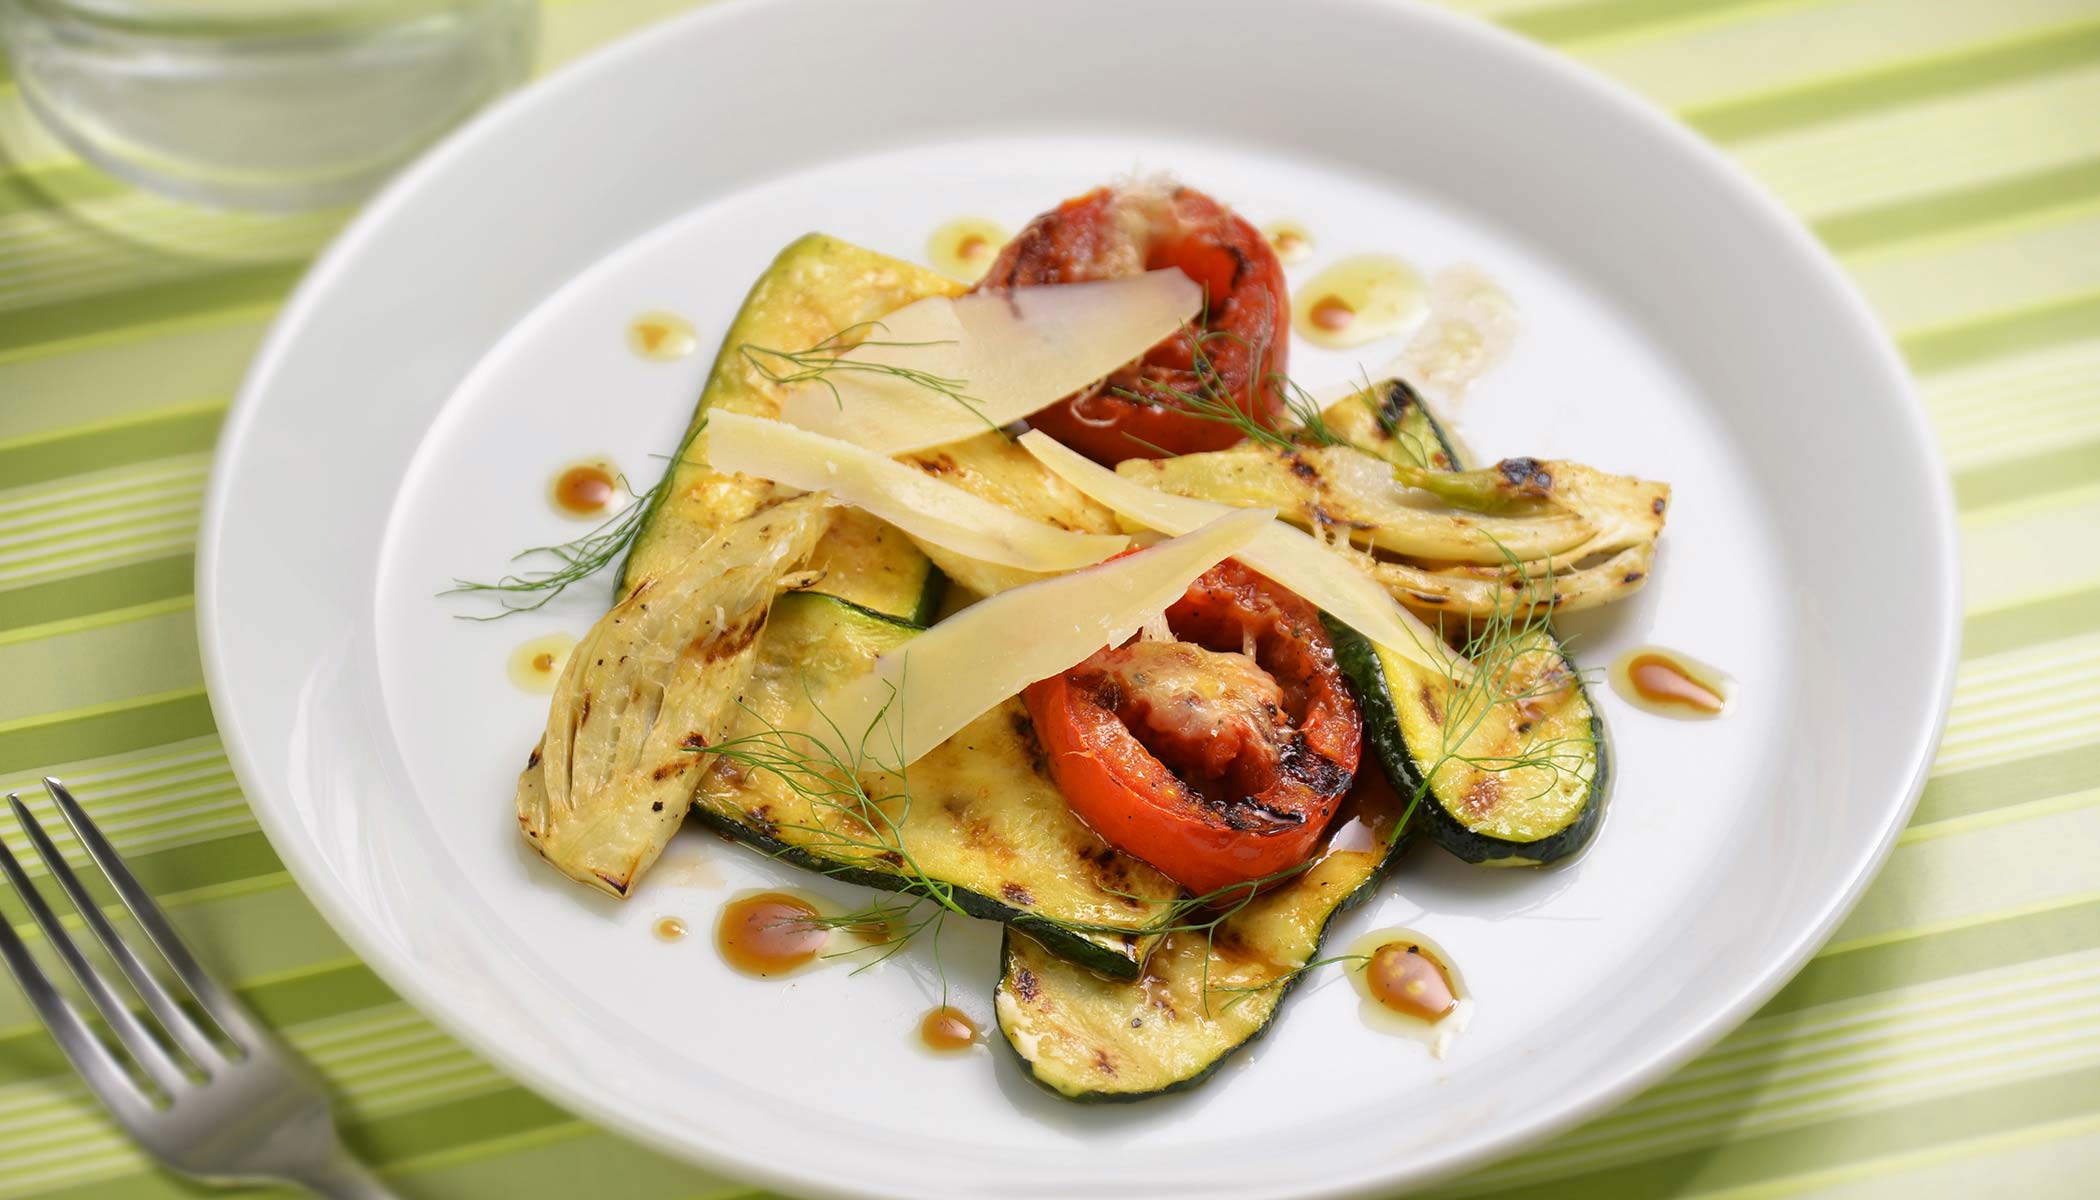 Zojirushi Recipe – Grilled Vegetables with Parmesan Cheese